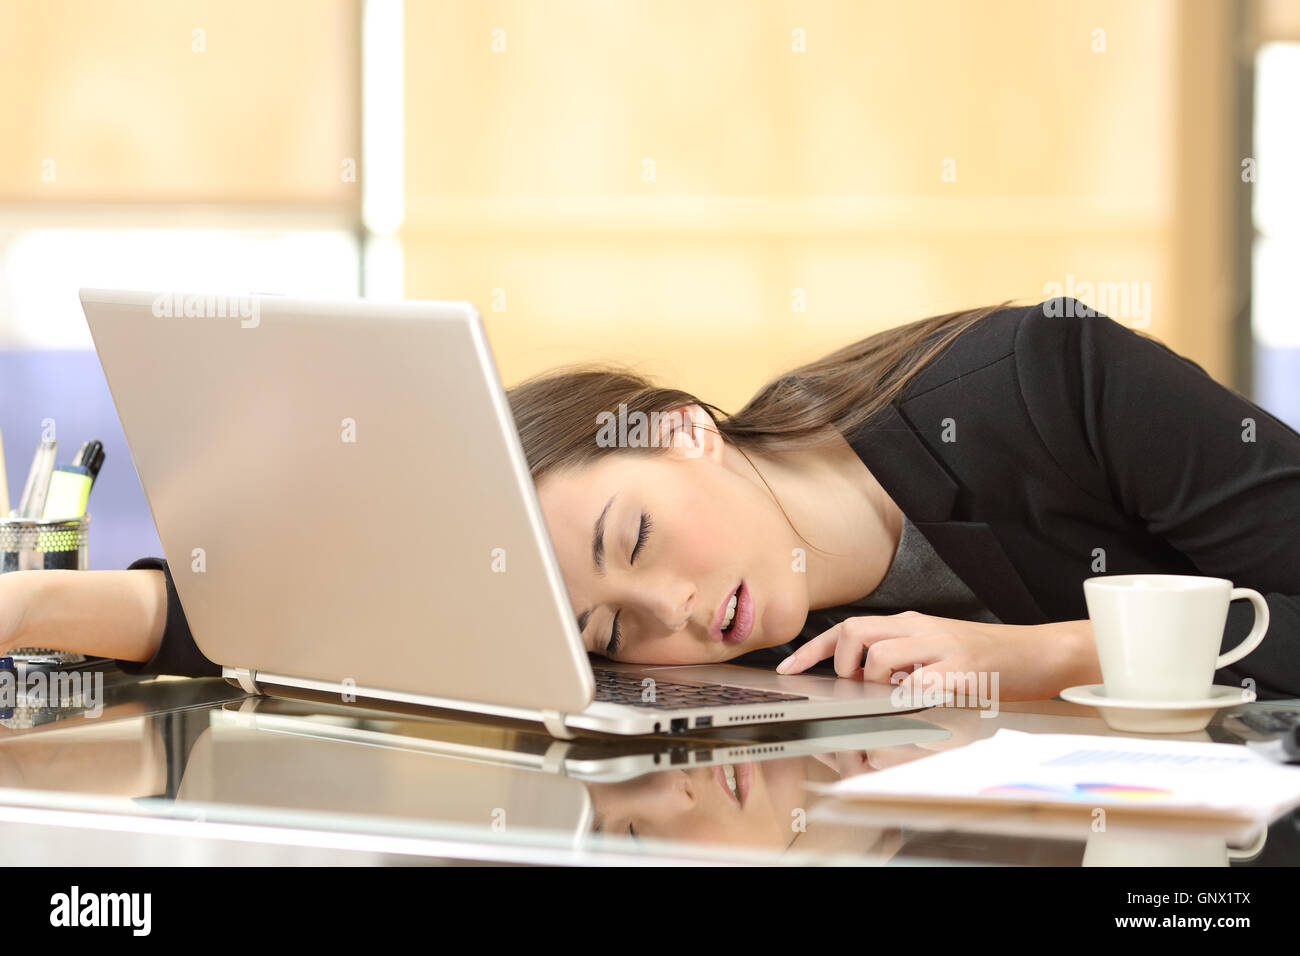 Overworked And Tired Businesswoman Sleeping Over A Laptop In A